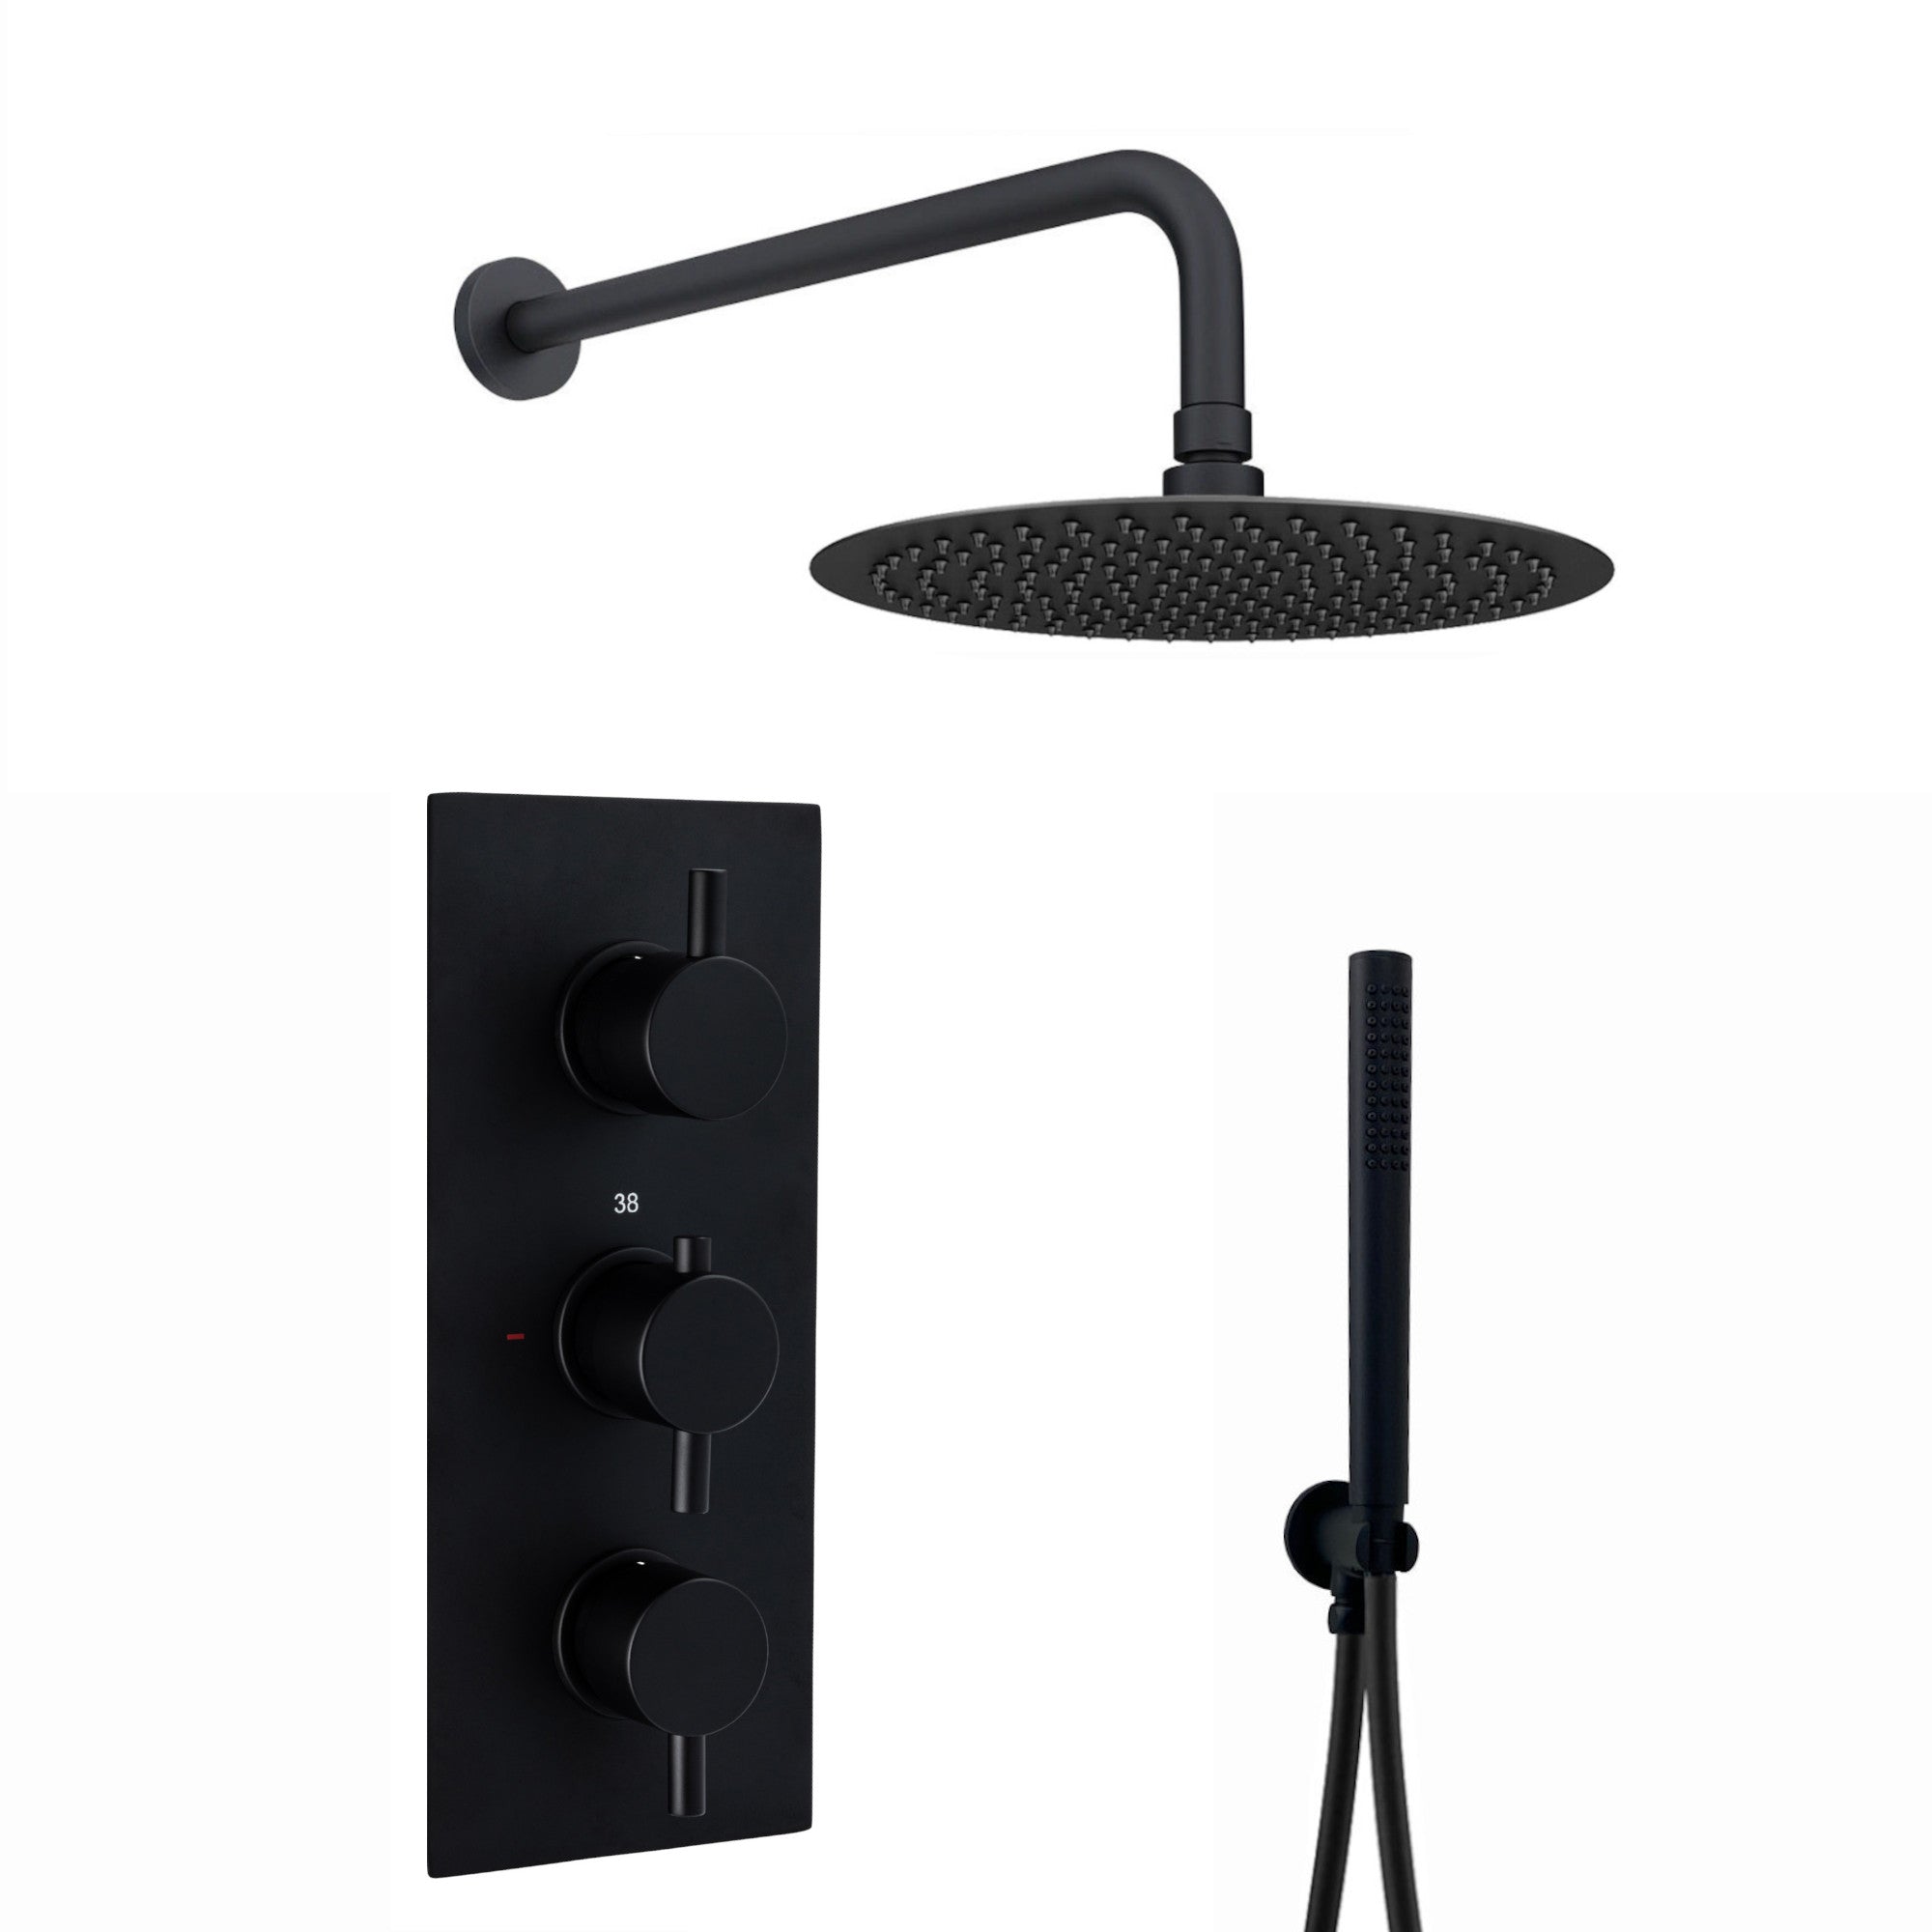 Venice Contemporary Round Concealed Thermostatic Shower Set Incl. Triple Valve, Wall Fixed 8" Shower Head, Handshower Kit - Matte Black (2 Outlet)